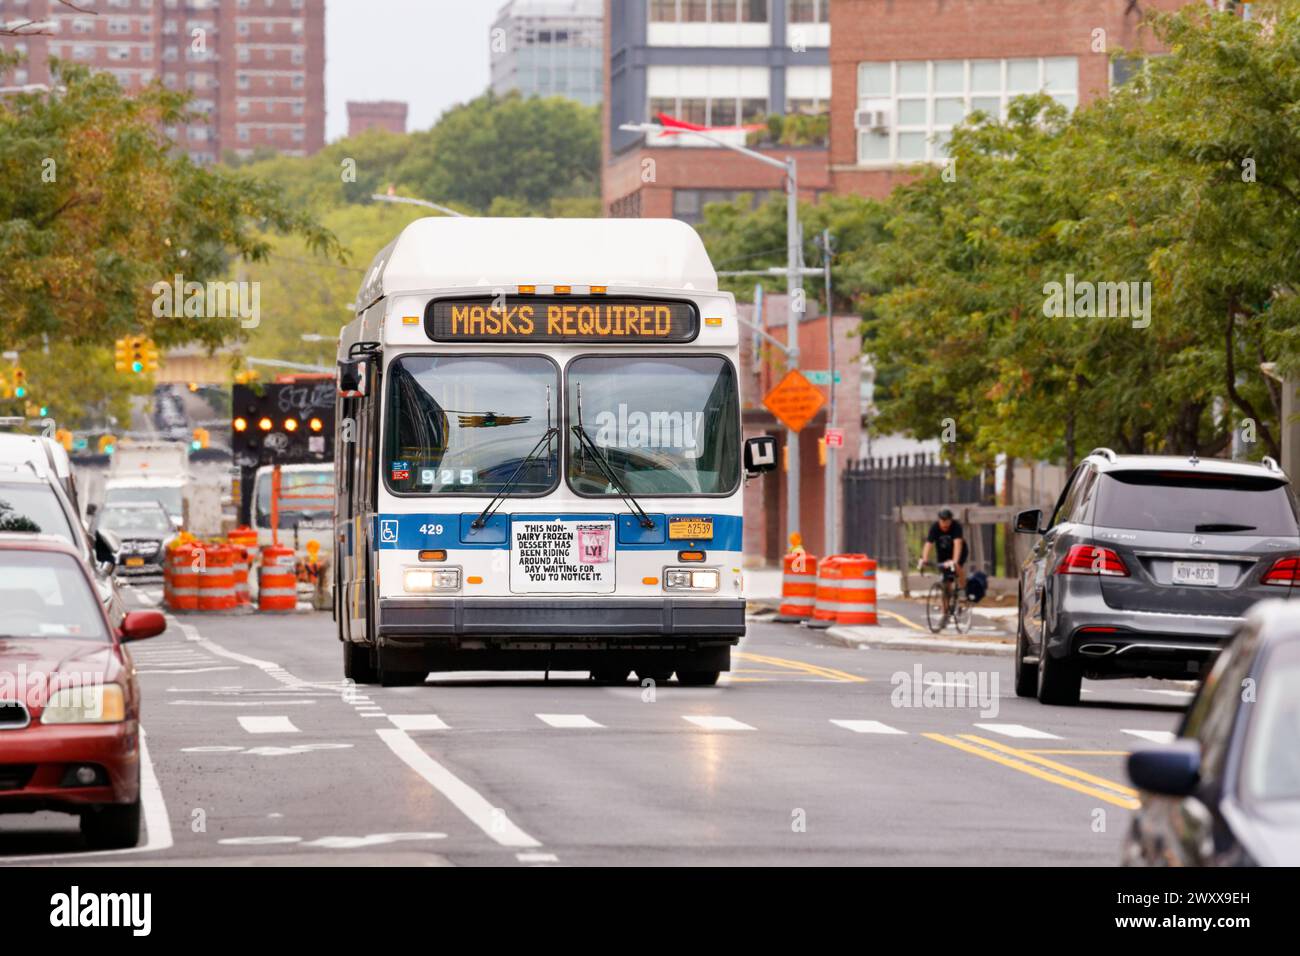 New York bus with covid sign Stock Photo